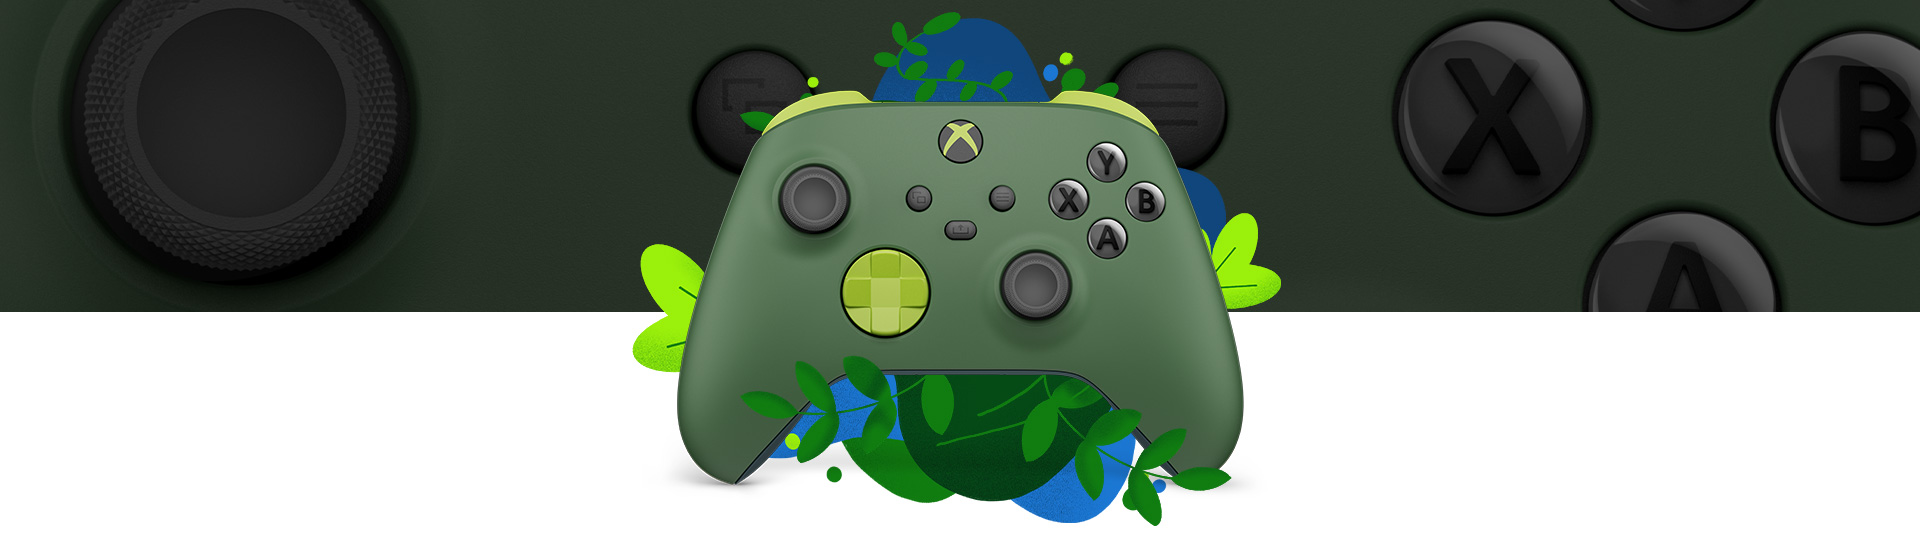 Front view of Xbox Wireless Controller – Remix Special Edition surrounded by vegetation and splashes of blue water with close-up view in the background.